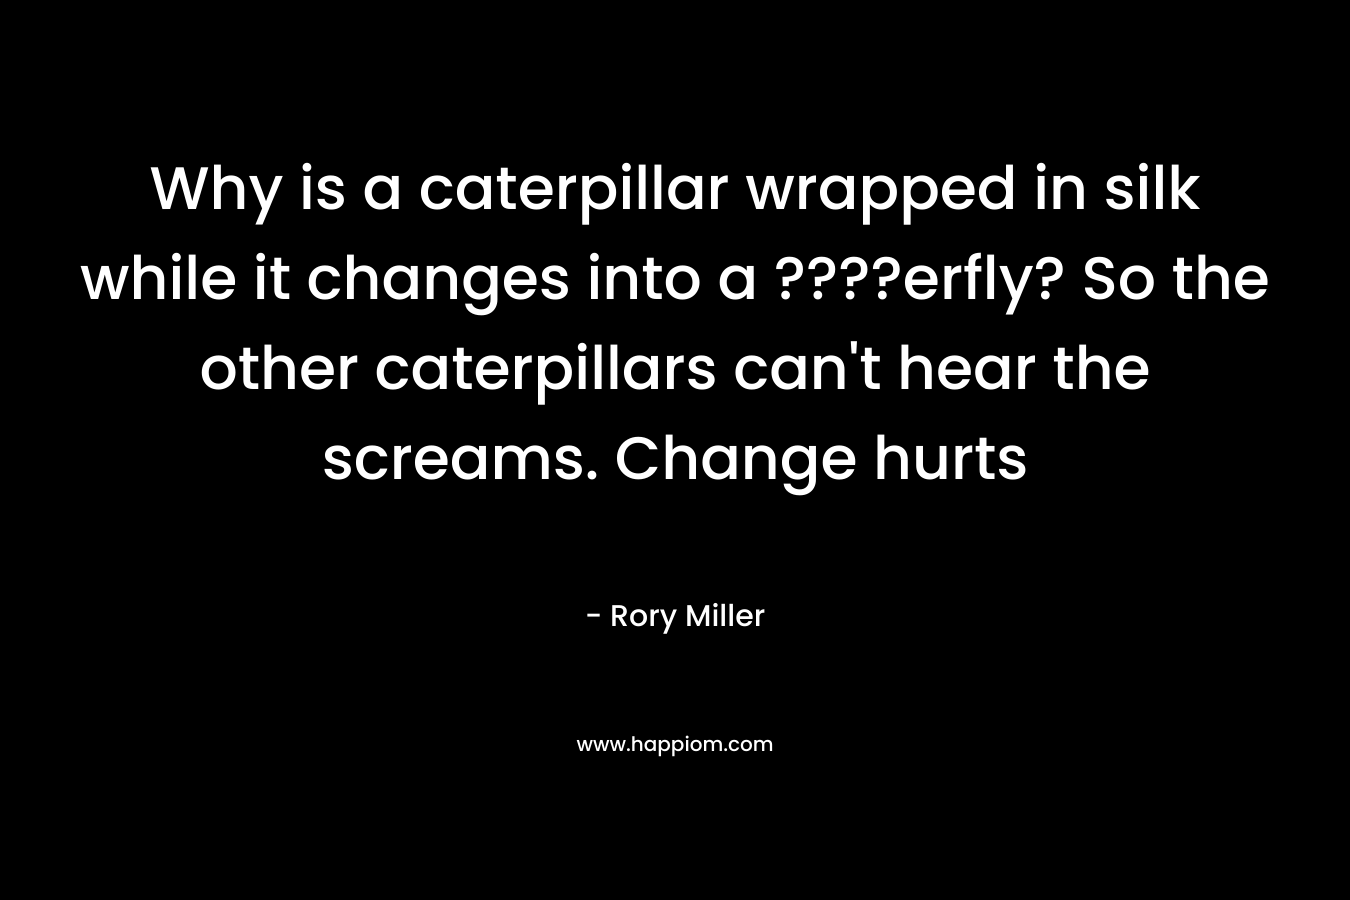 Why is a caterpillar wrapped in silk while it changes into a ????erfly? So the other caterpillars can't hear the screams. Change hurts